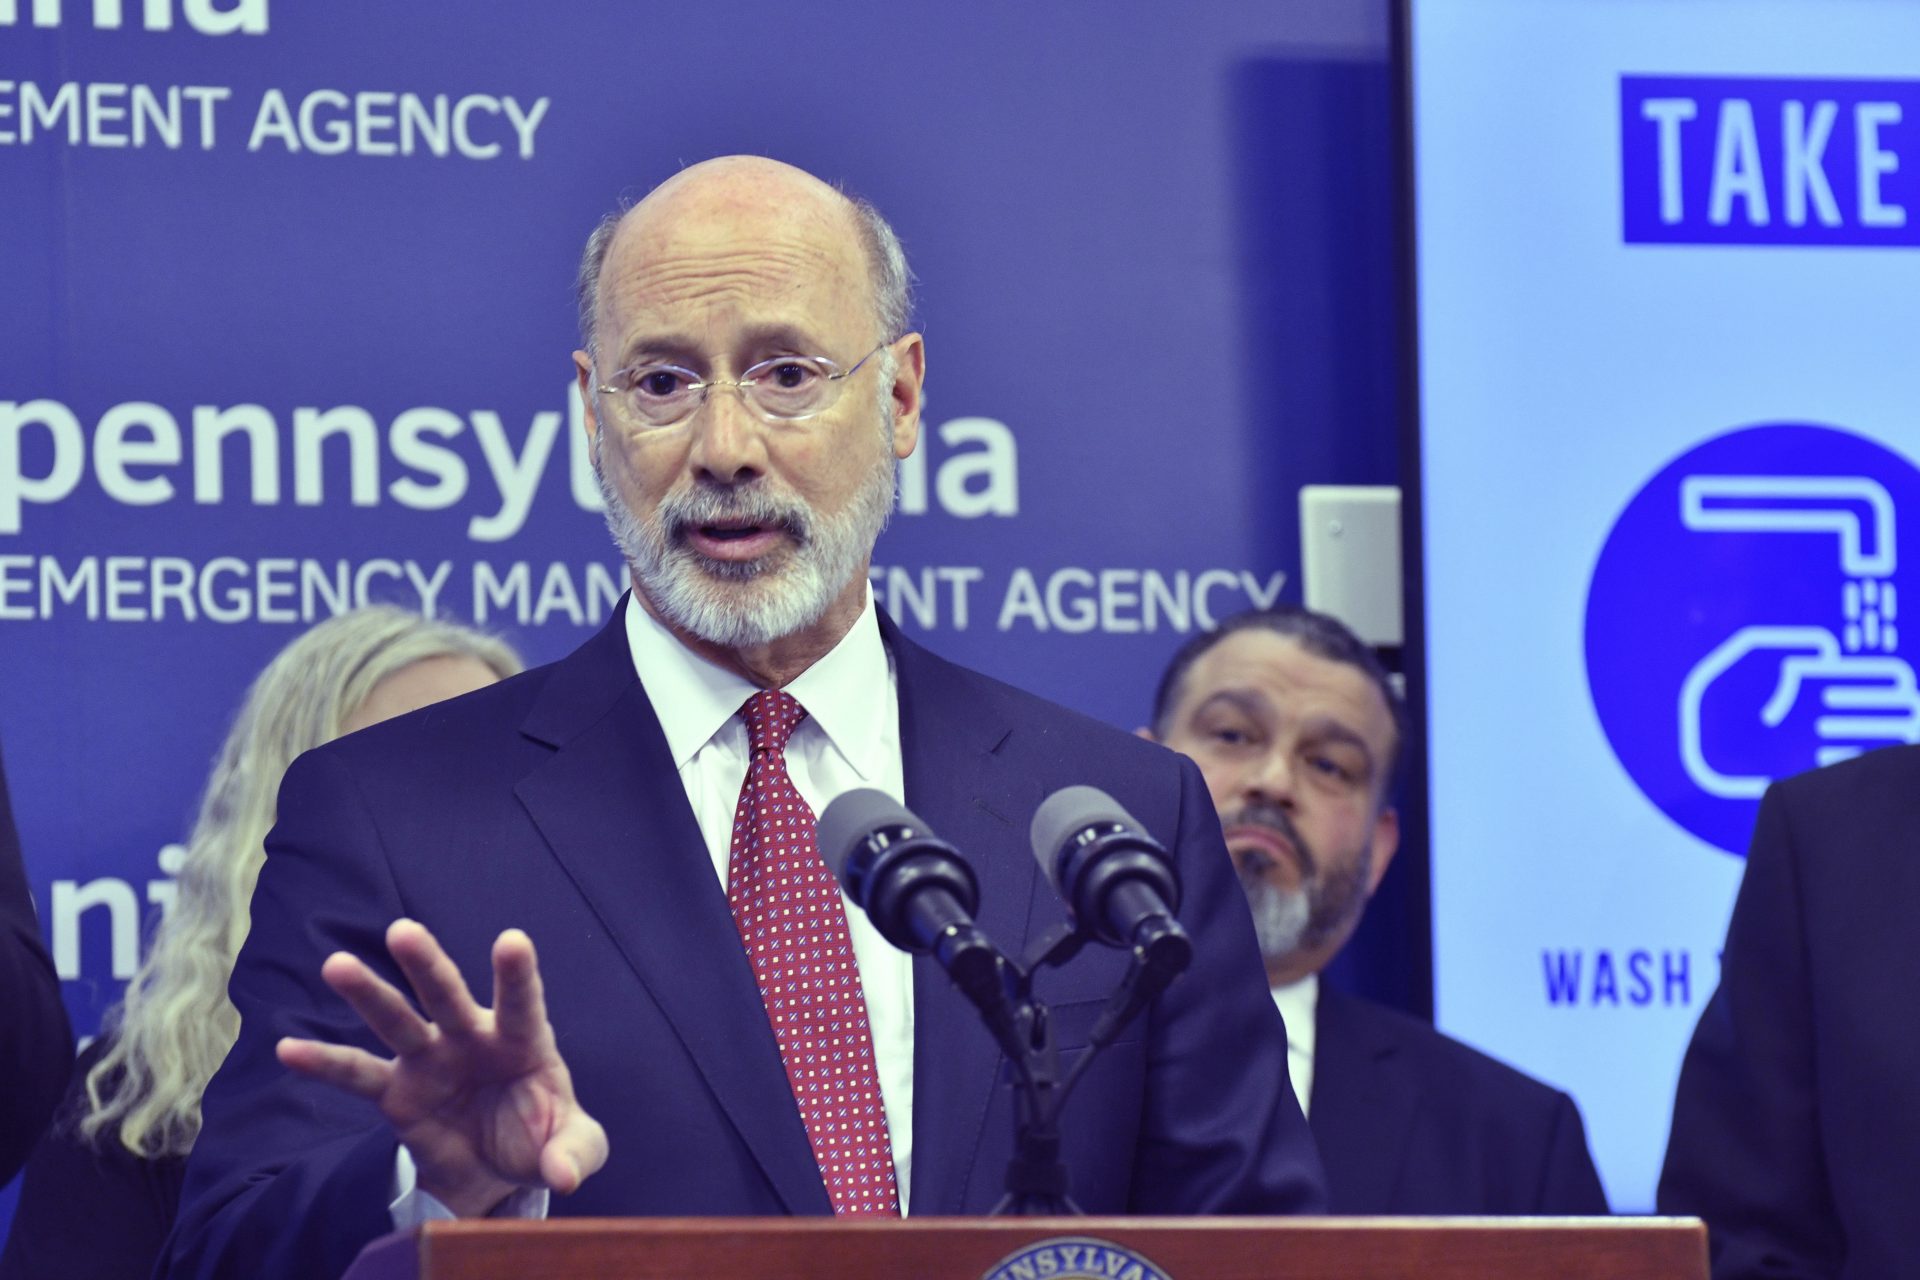 Gov. Tom Wolf of Pennsylvania speaks at a new conference at Pennsylvania Emergency Management Headquarters where he said he was ordering schools and other facilities to close in a suburban Philadelphia county, Montgomery County, that has been hard-hit by the COVID-19, Thursday, March 12, 2020 in Harrisburg, Pa.